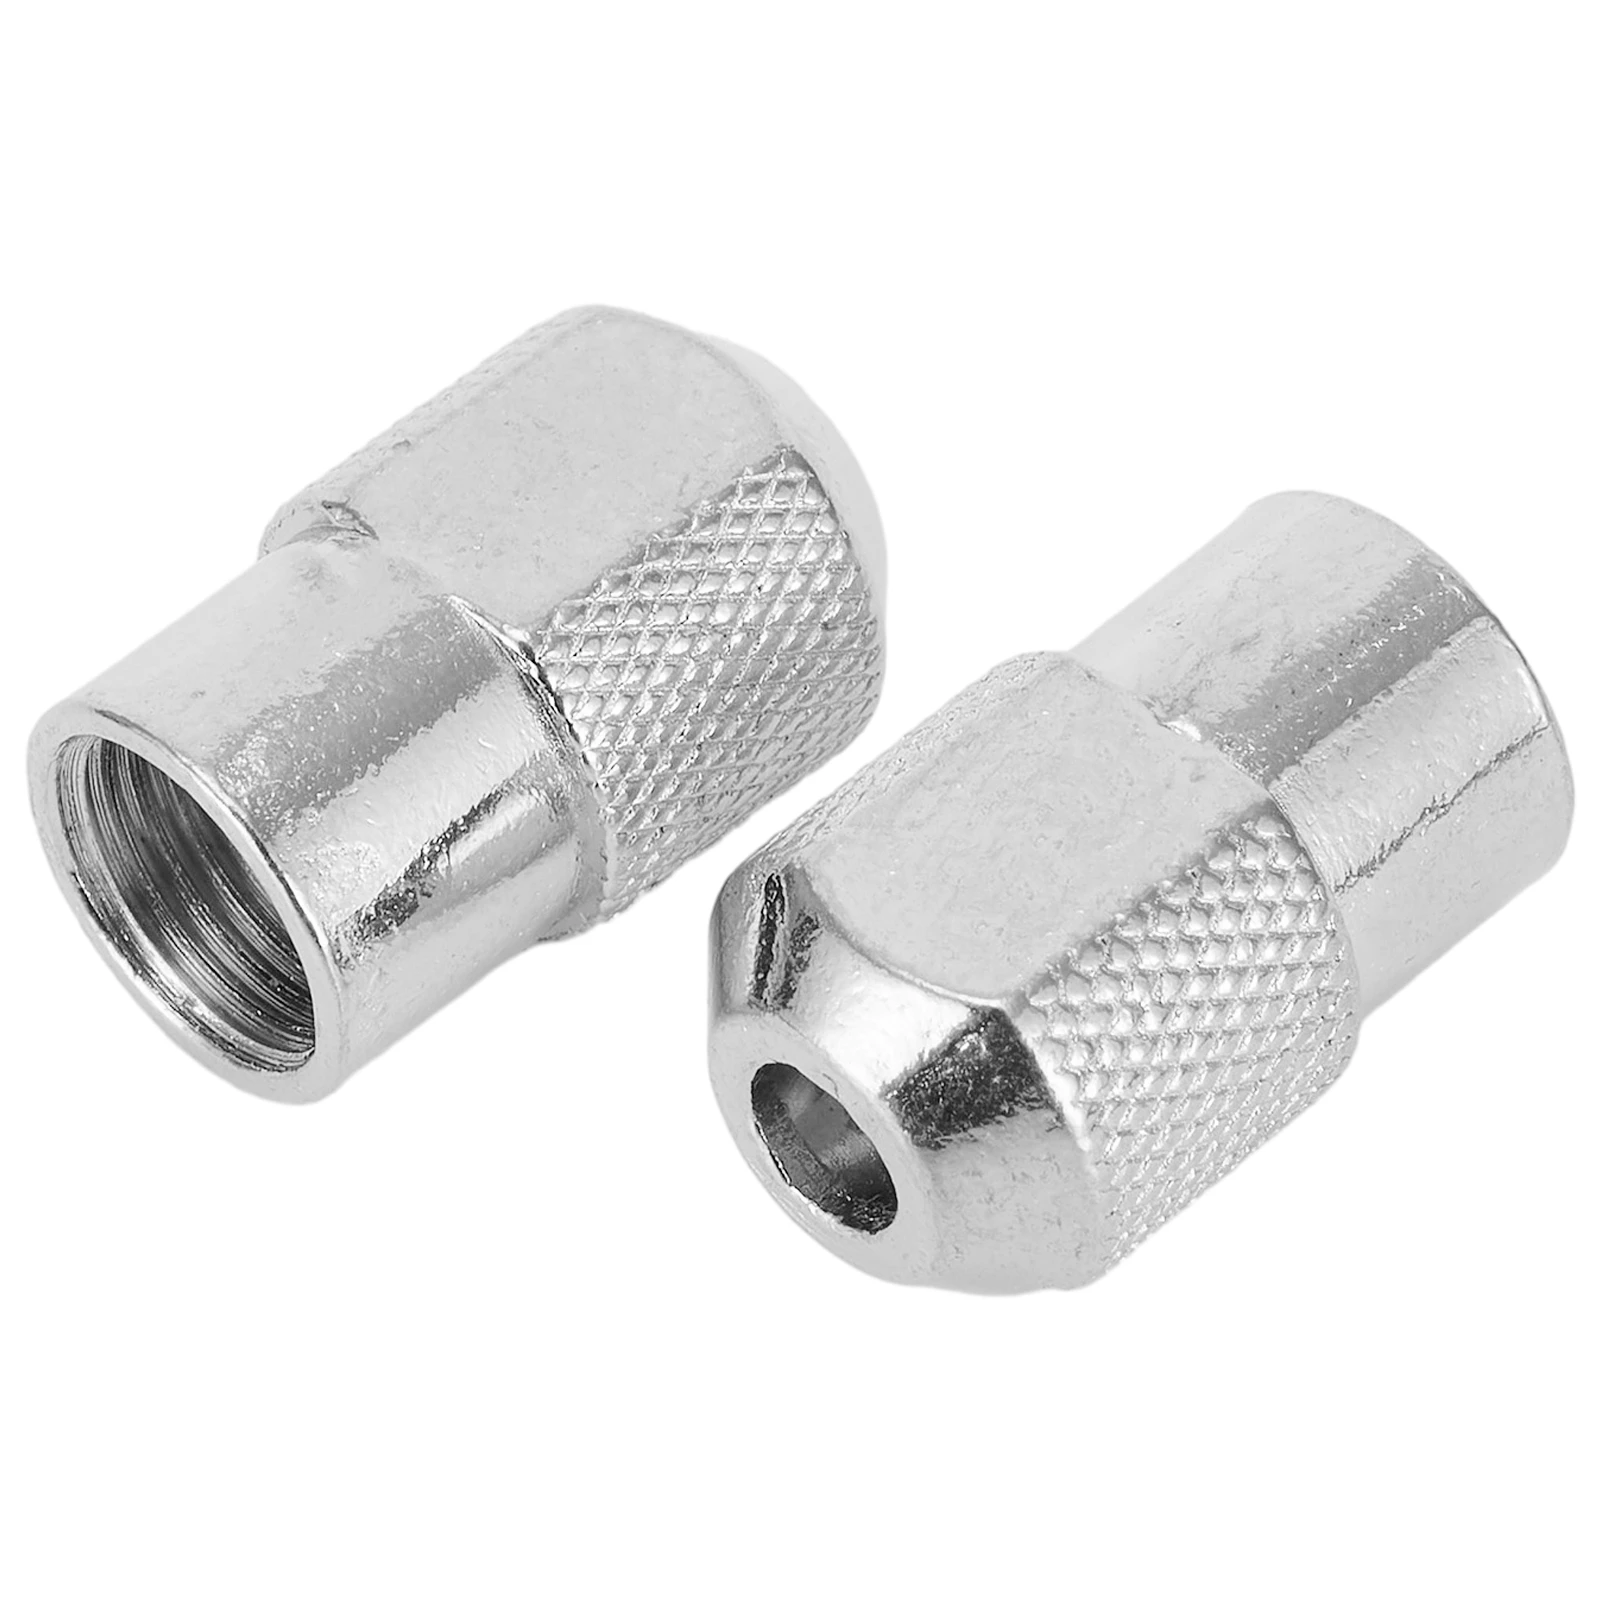 5pcs M8X0.75mm Drill Chuck Electric Mill Shaft Screw Cap Nut Collet For Electric Mill Grinder Shaft Rotary Tool Power Tools Acce кабель atcom power supply cable 1 8m 0 75mm at10118